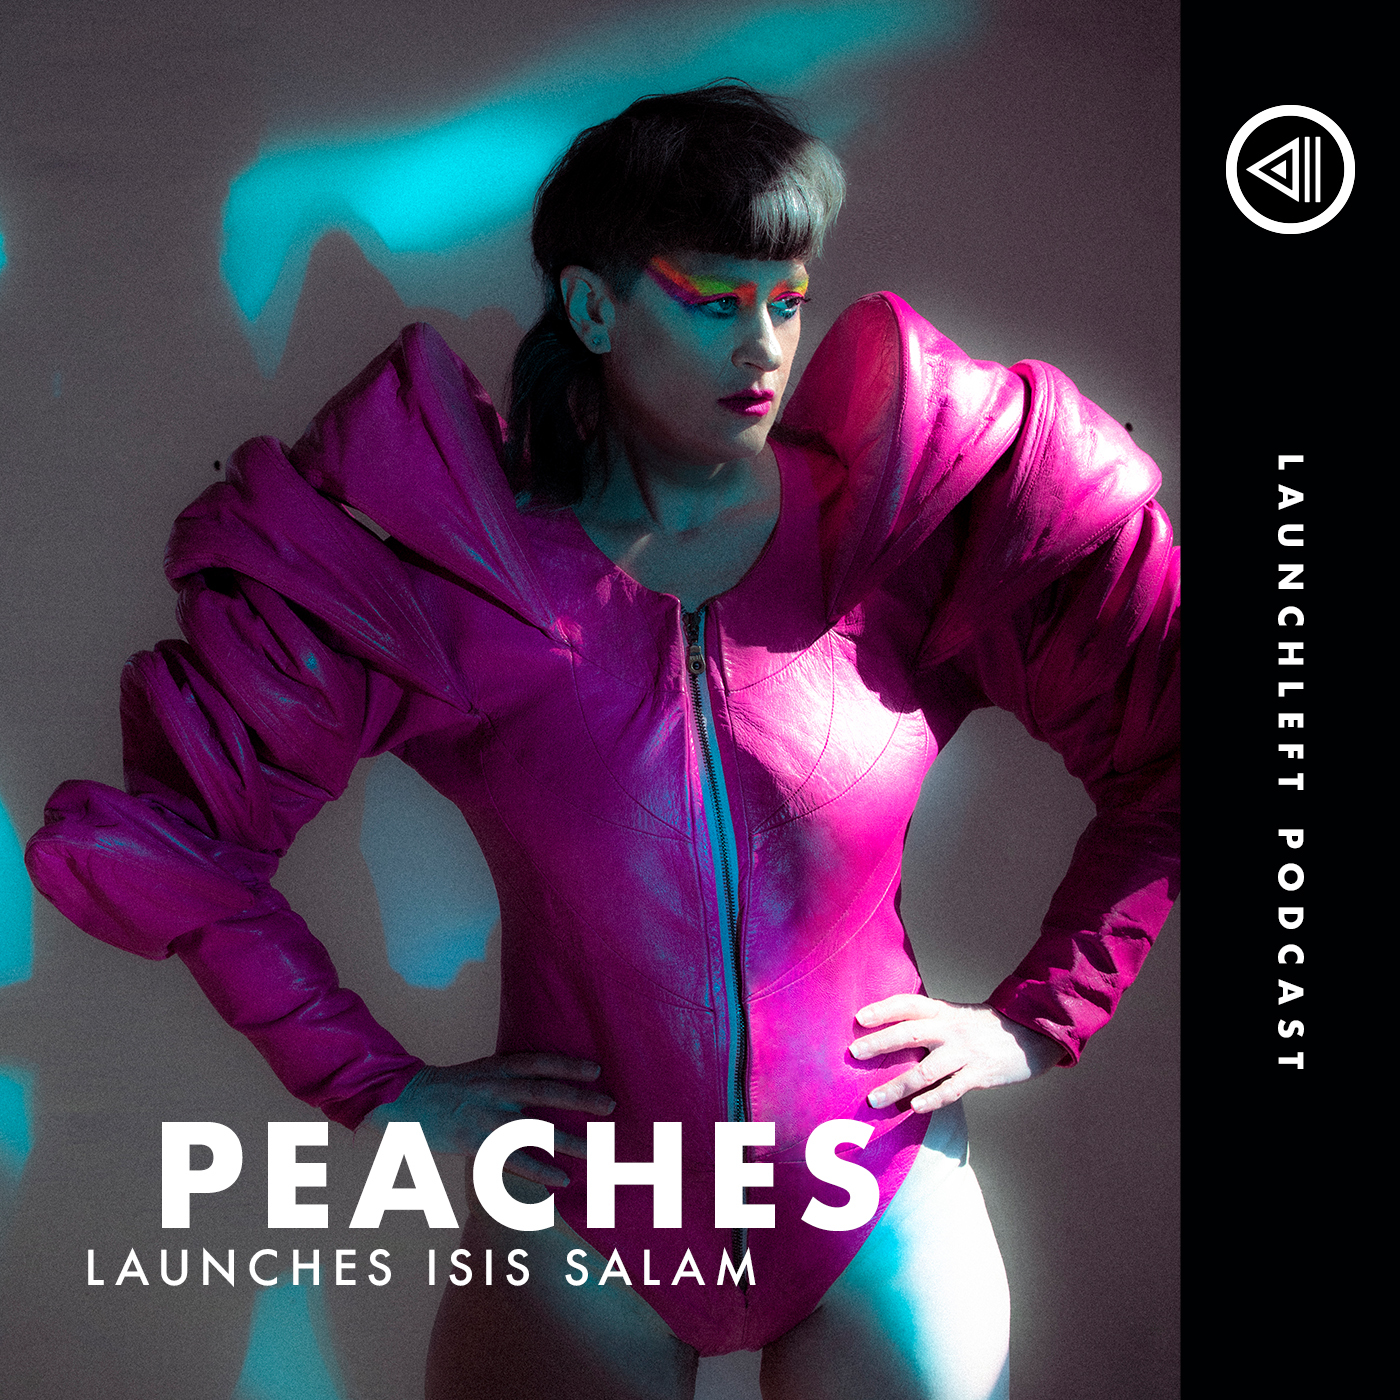 PEACHES launches Isis Salam